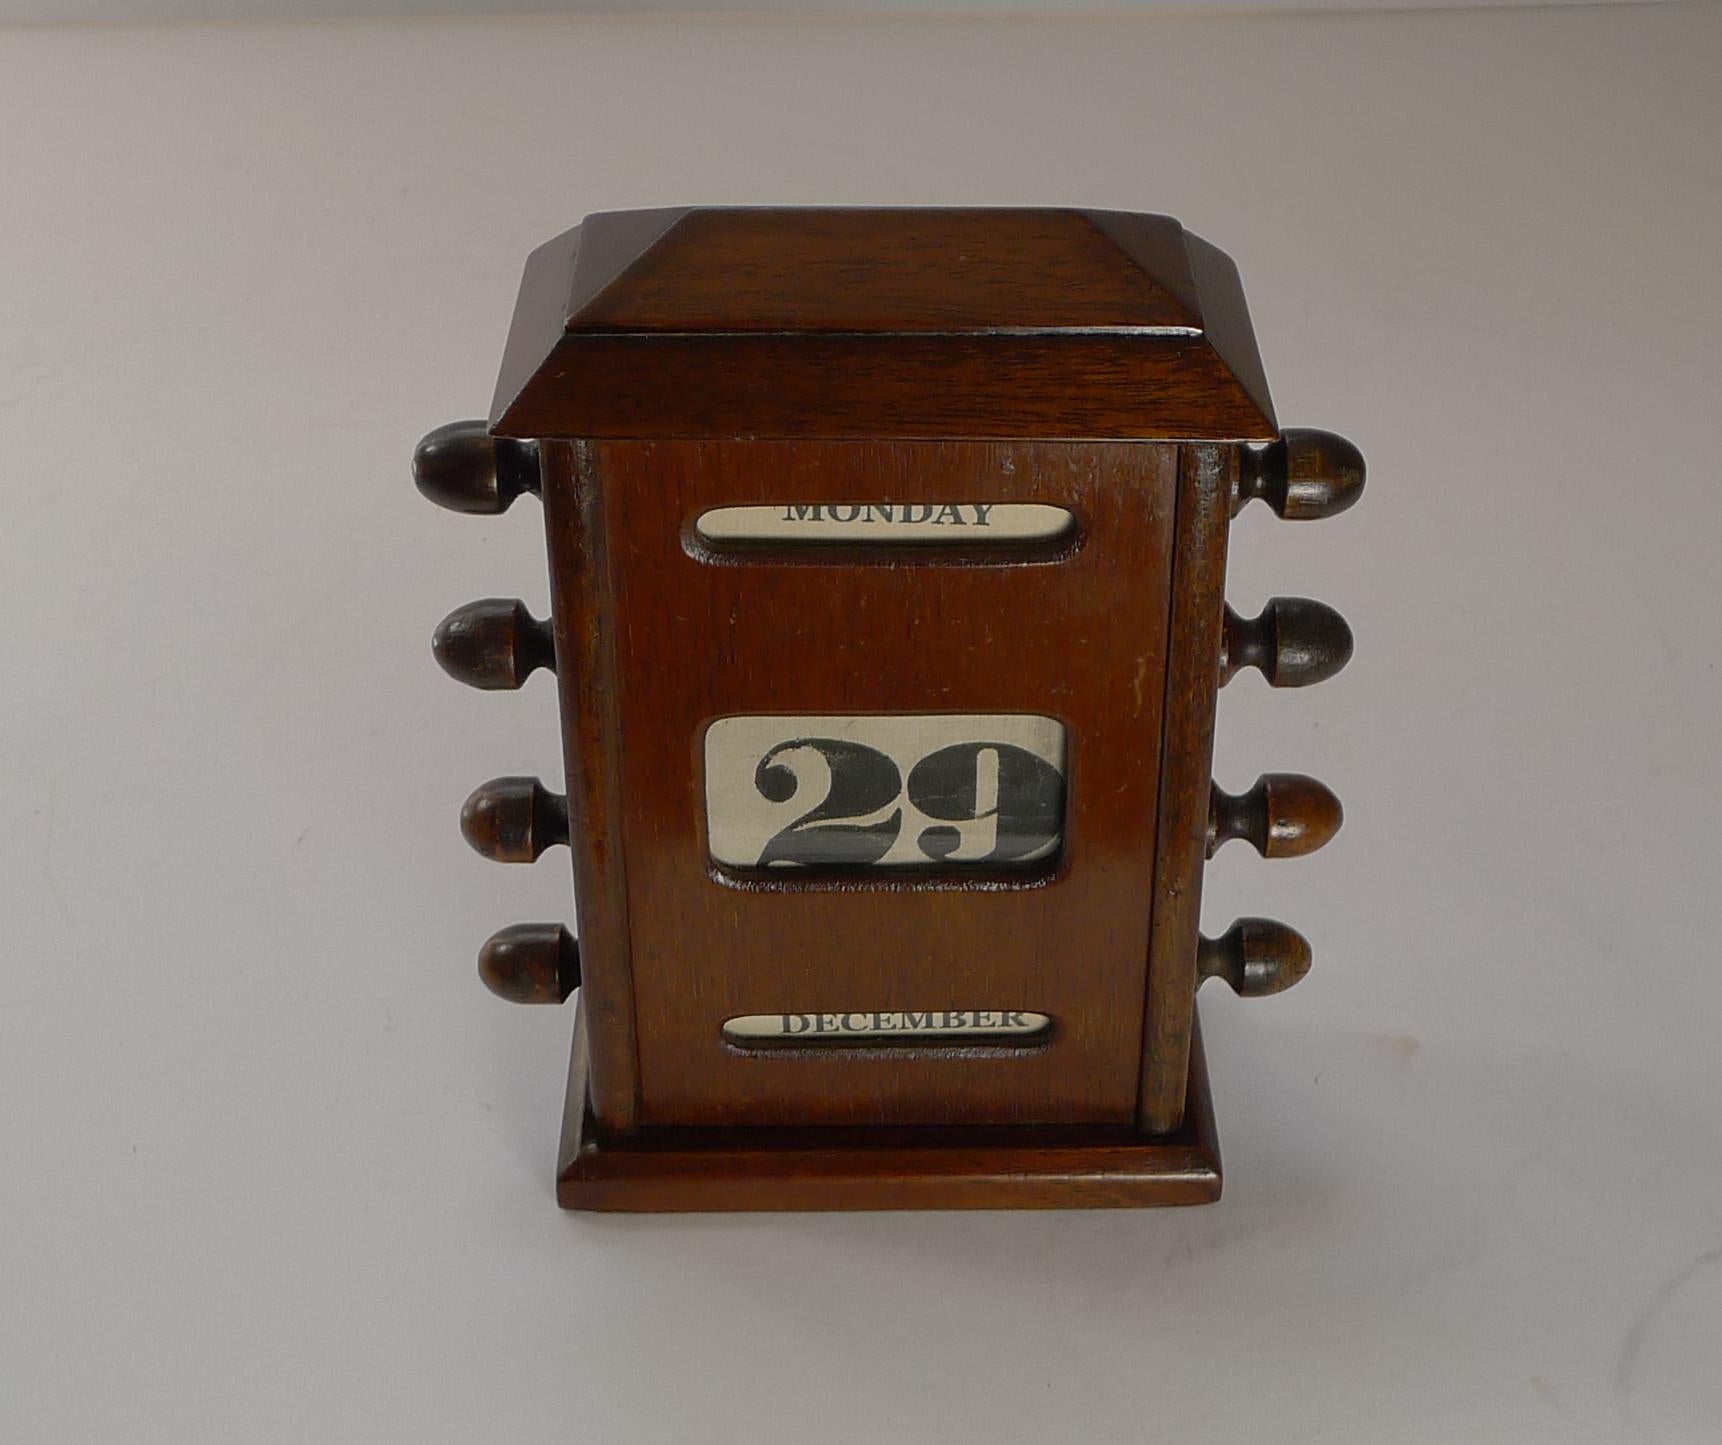 A fabulous Edwardian desk-top perpetual calendar; The calendar is operated by turning the keys each side to alter the day date and month, the panels protected by a glass front. 

Excellent working condition measuring 4 1/4